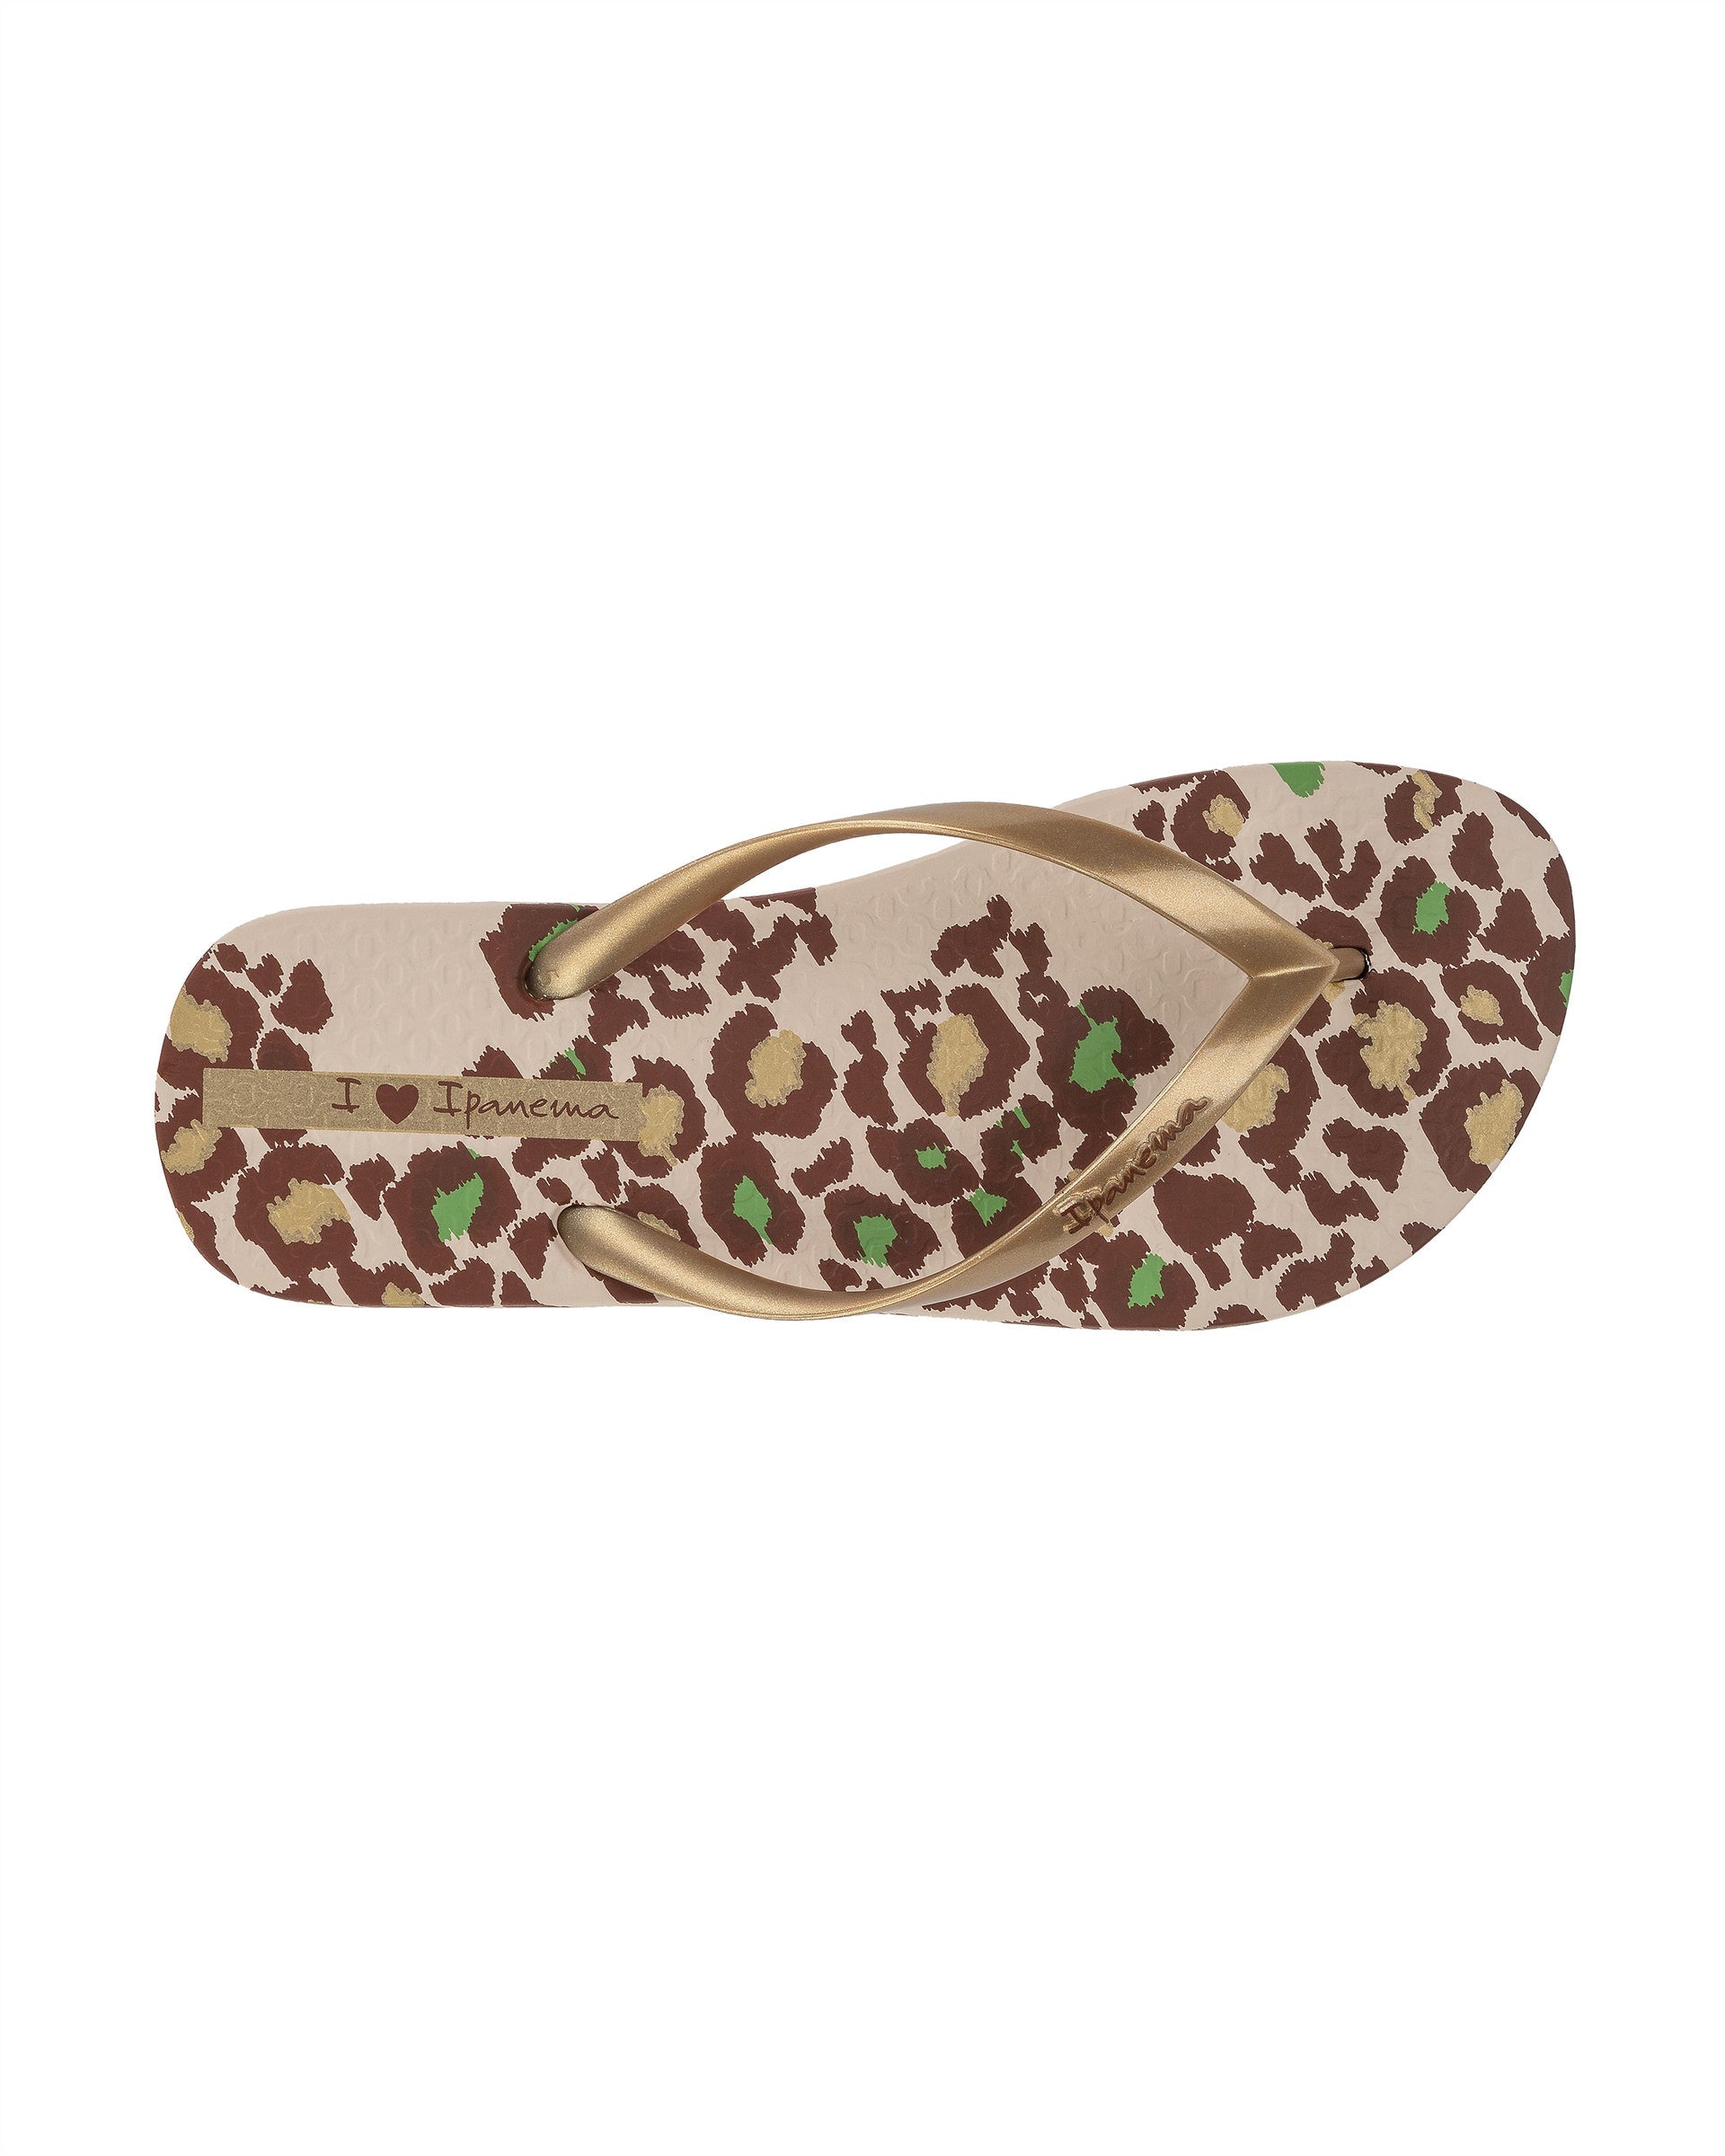 Top view of a beige Ipanema Animal Print women's flip flop with glitter gold straps and leopard sole print.